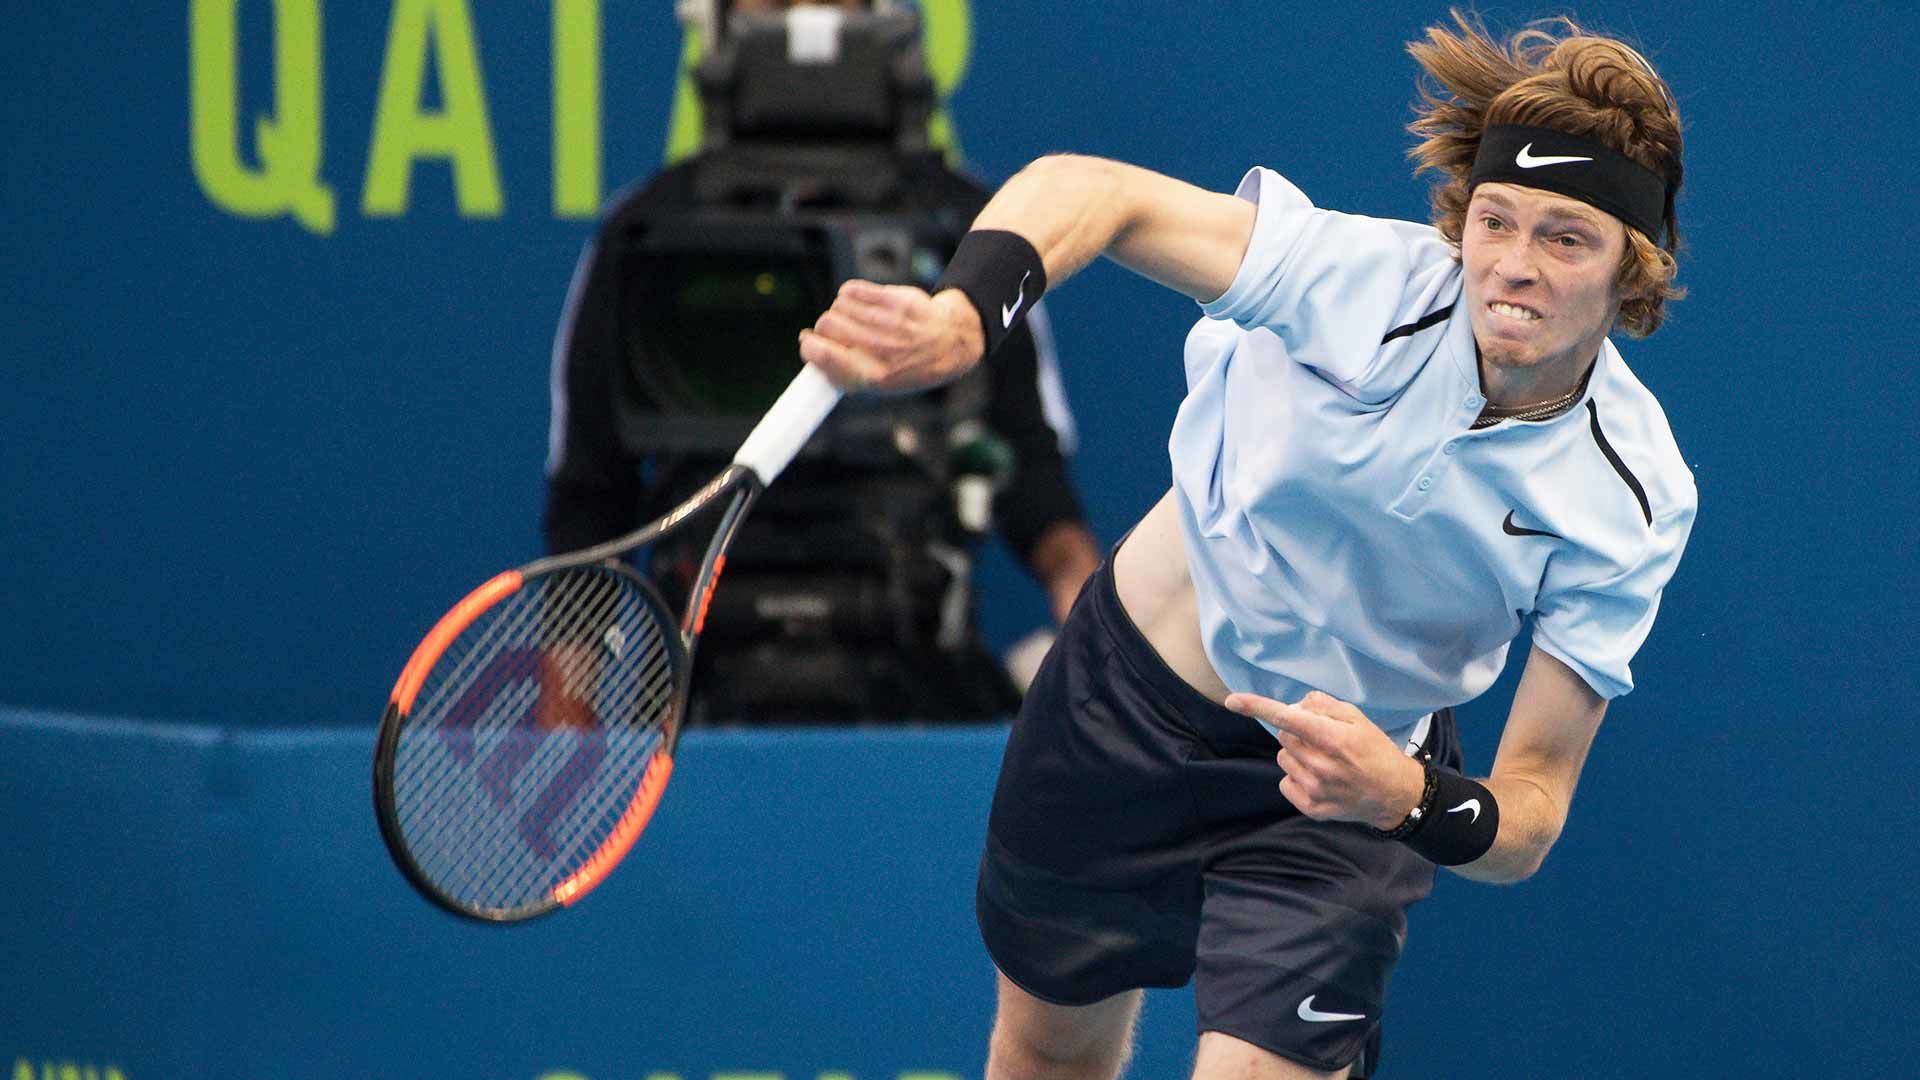 Taylor Harry Fritz vs. Andrey Rublev Prediction, Betting Tips & Odds │18 AUGUST, 2022